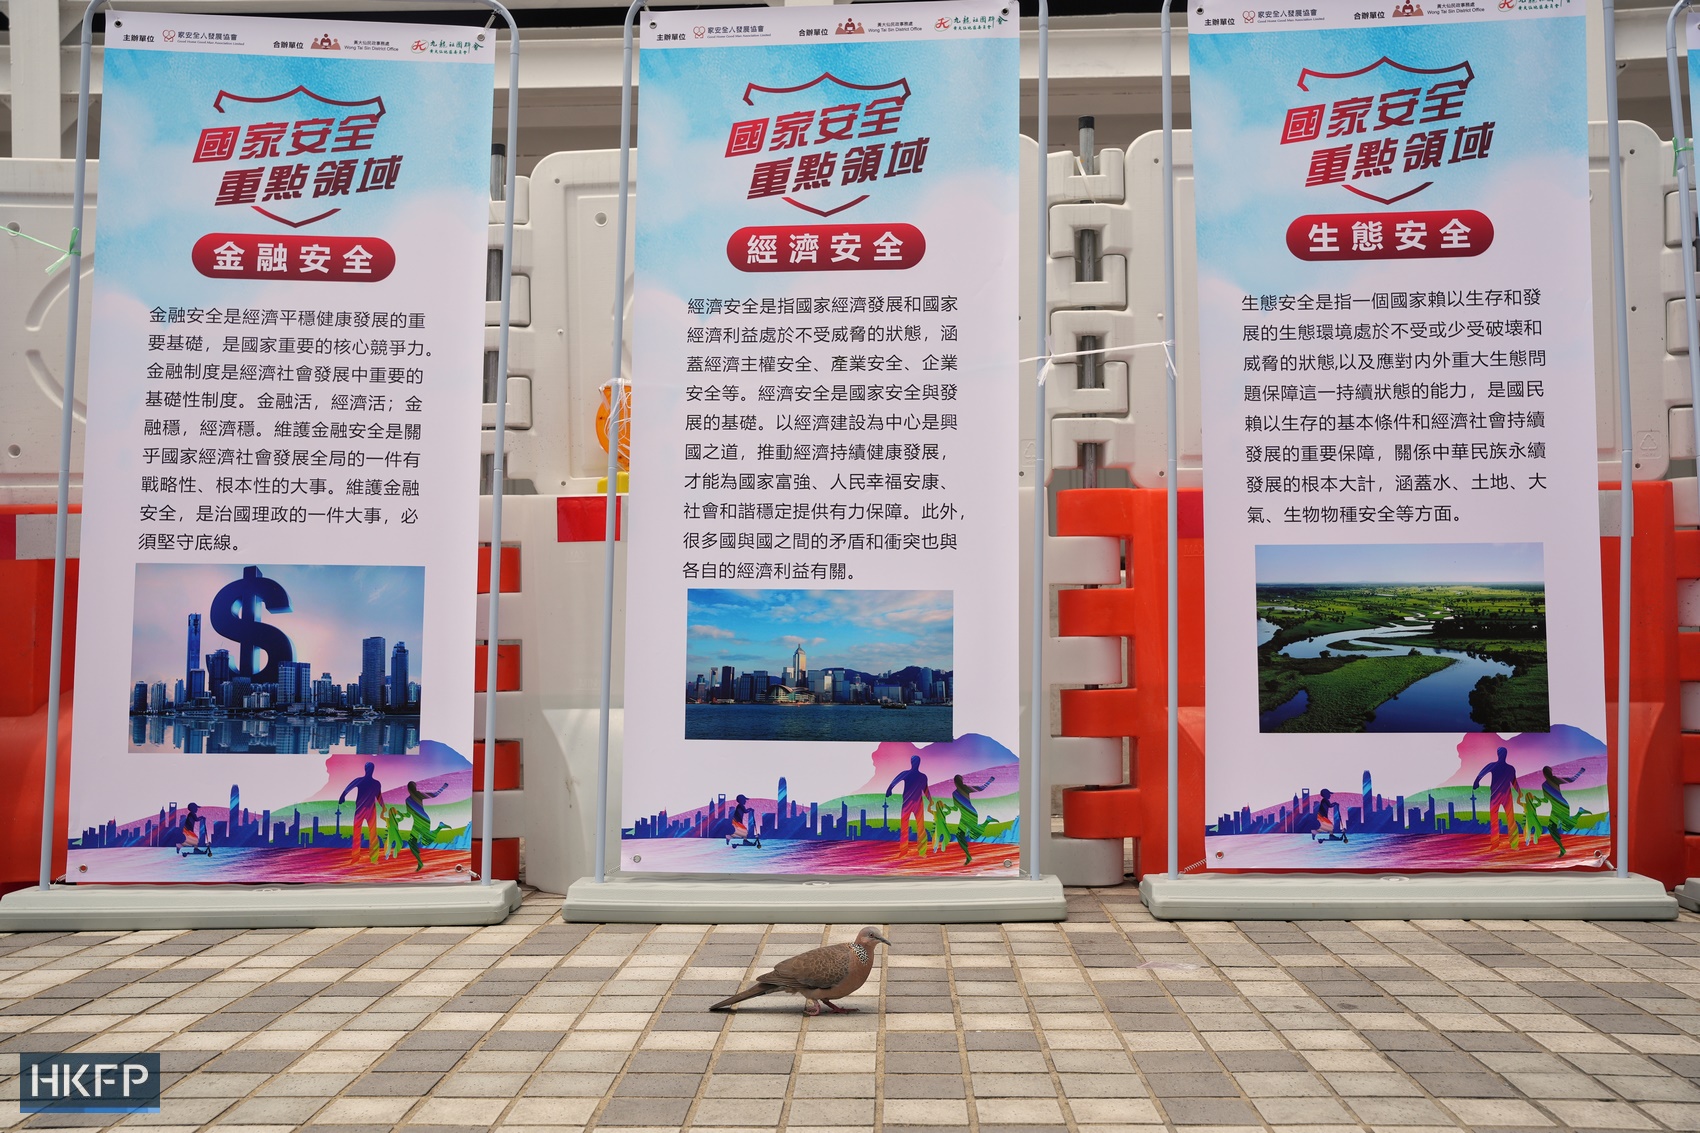 “Secure Our City Begins with 'Me' - Mega Mosaic Block Building Event” is held in Wong Tai Sin on April 15, 2024 as part of the activities of National Security Education Day,